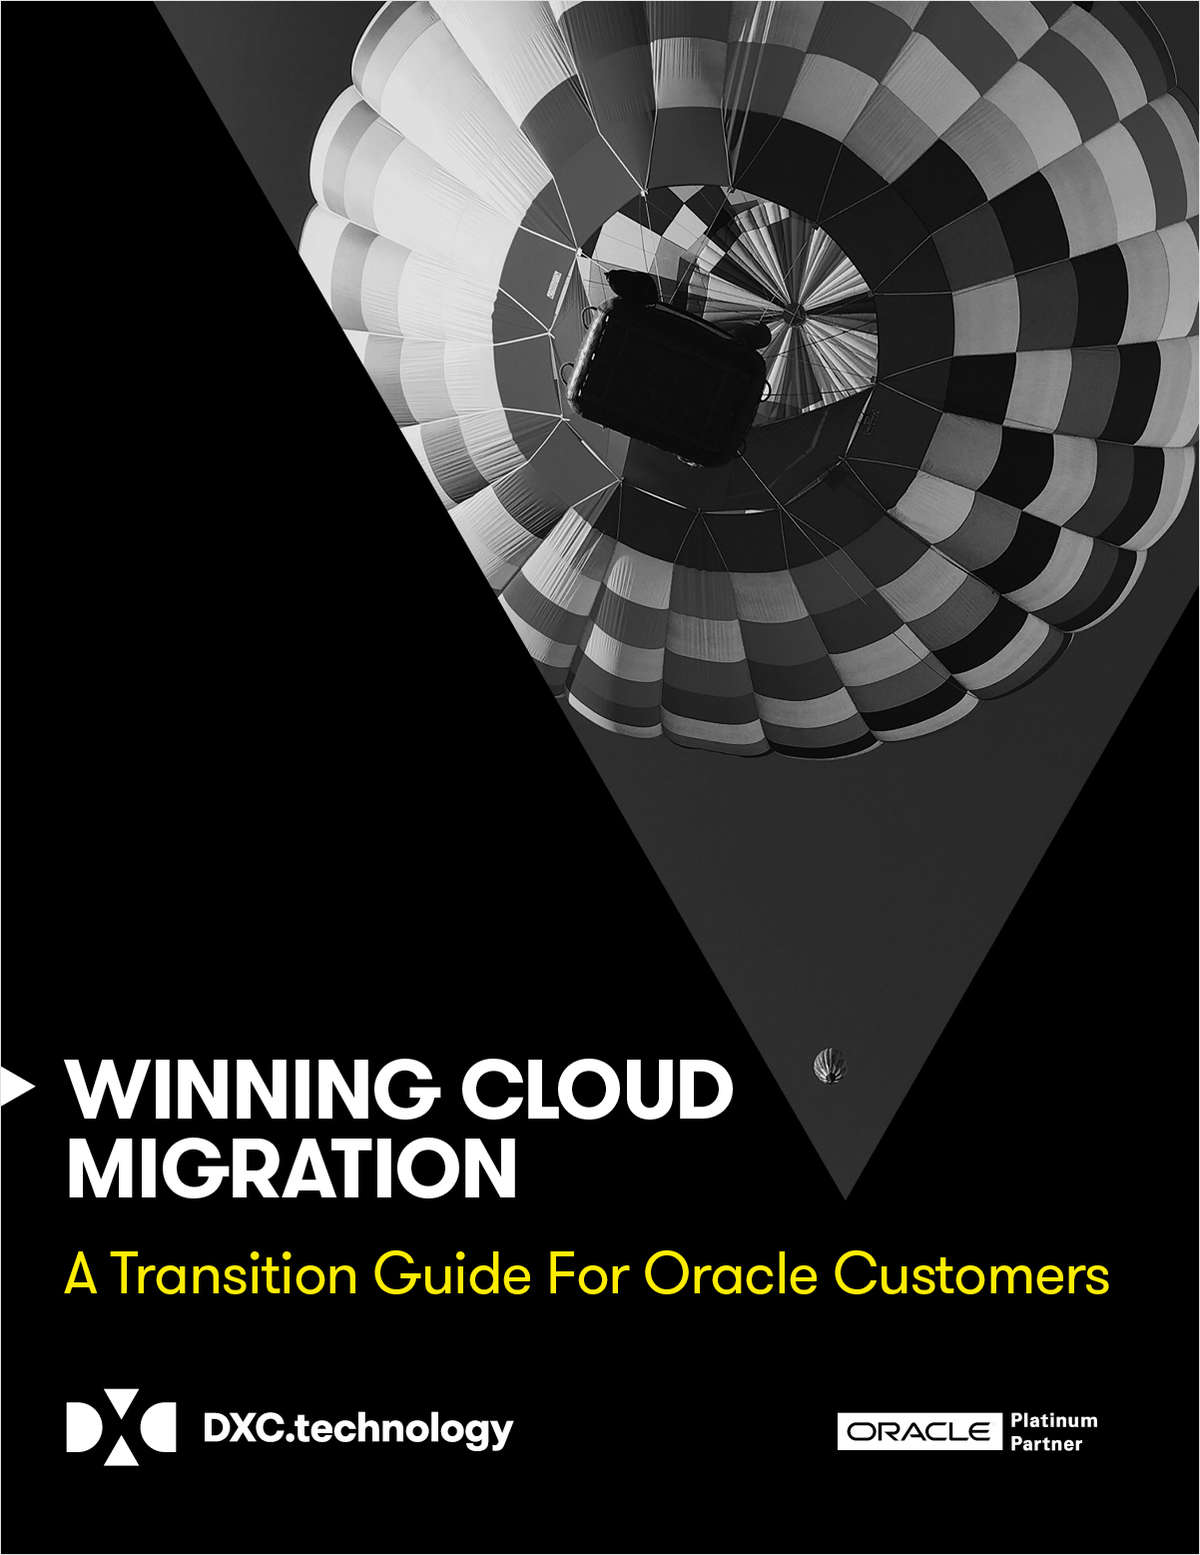 Winning Cloud Migration: A Transition Guide For Oracle Customers